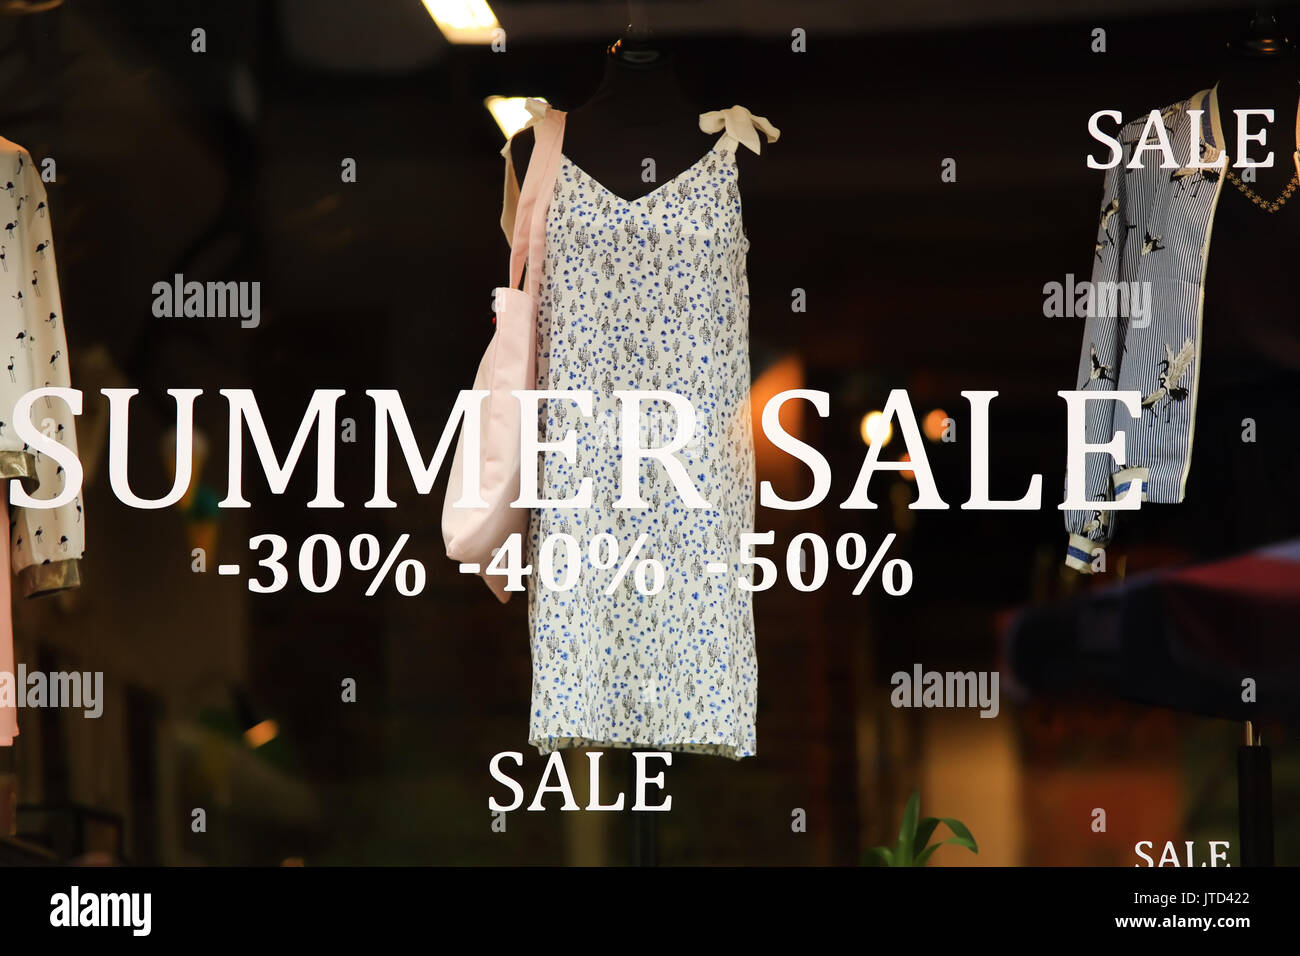 Summer sale concept. Storefont with discount signs. Stock Photo